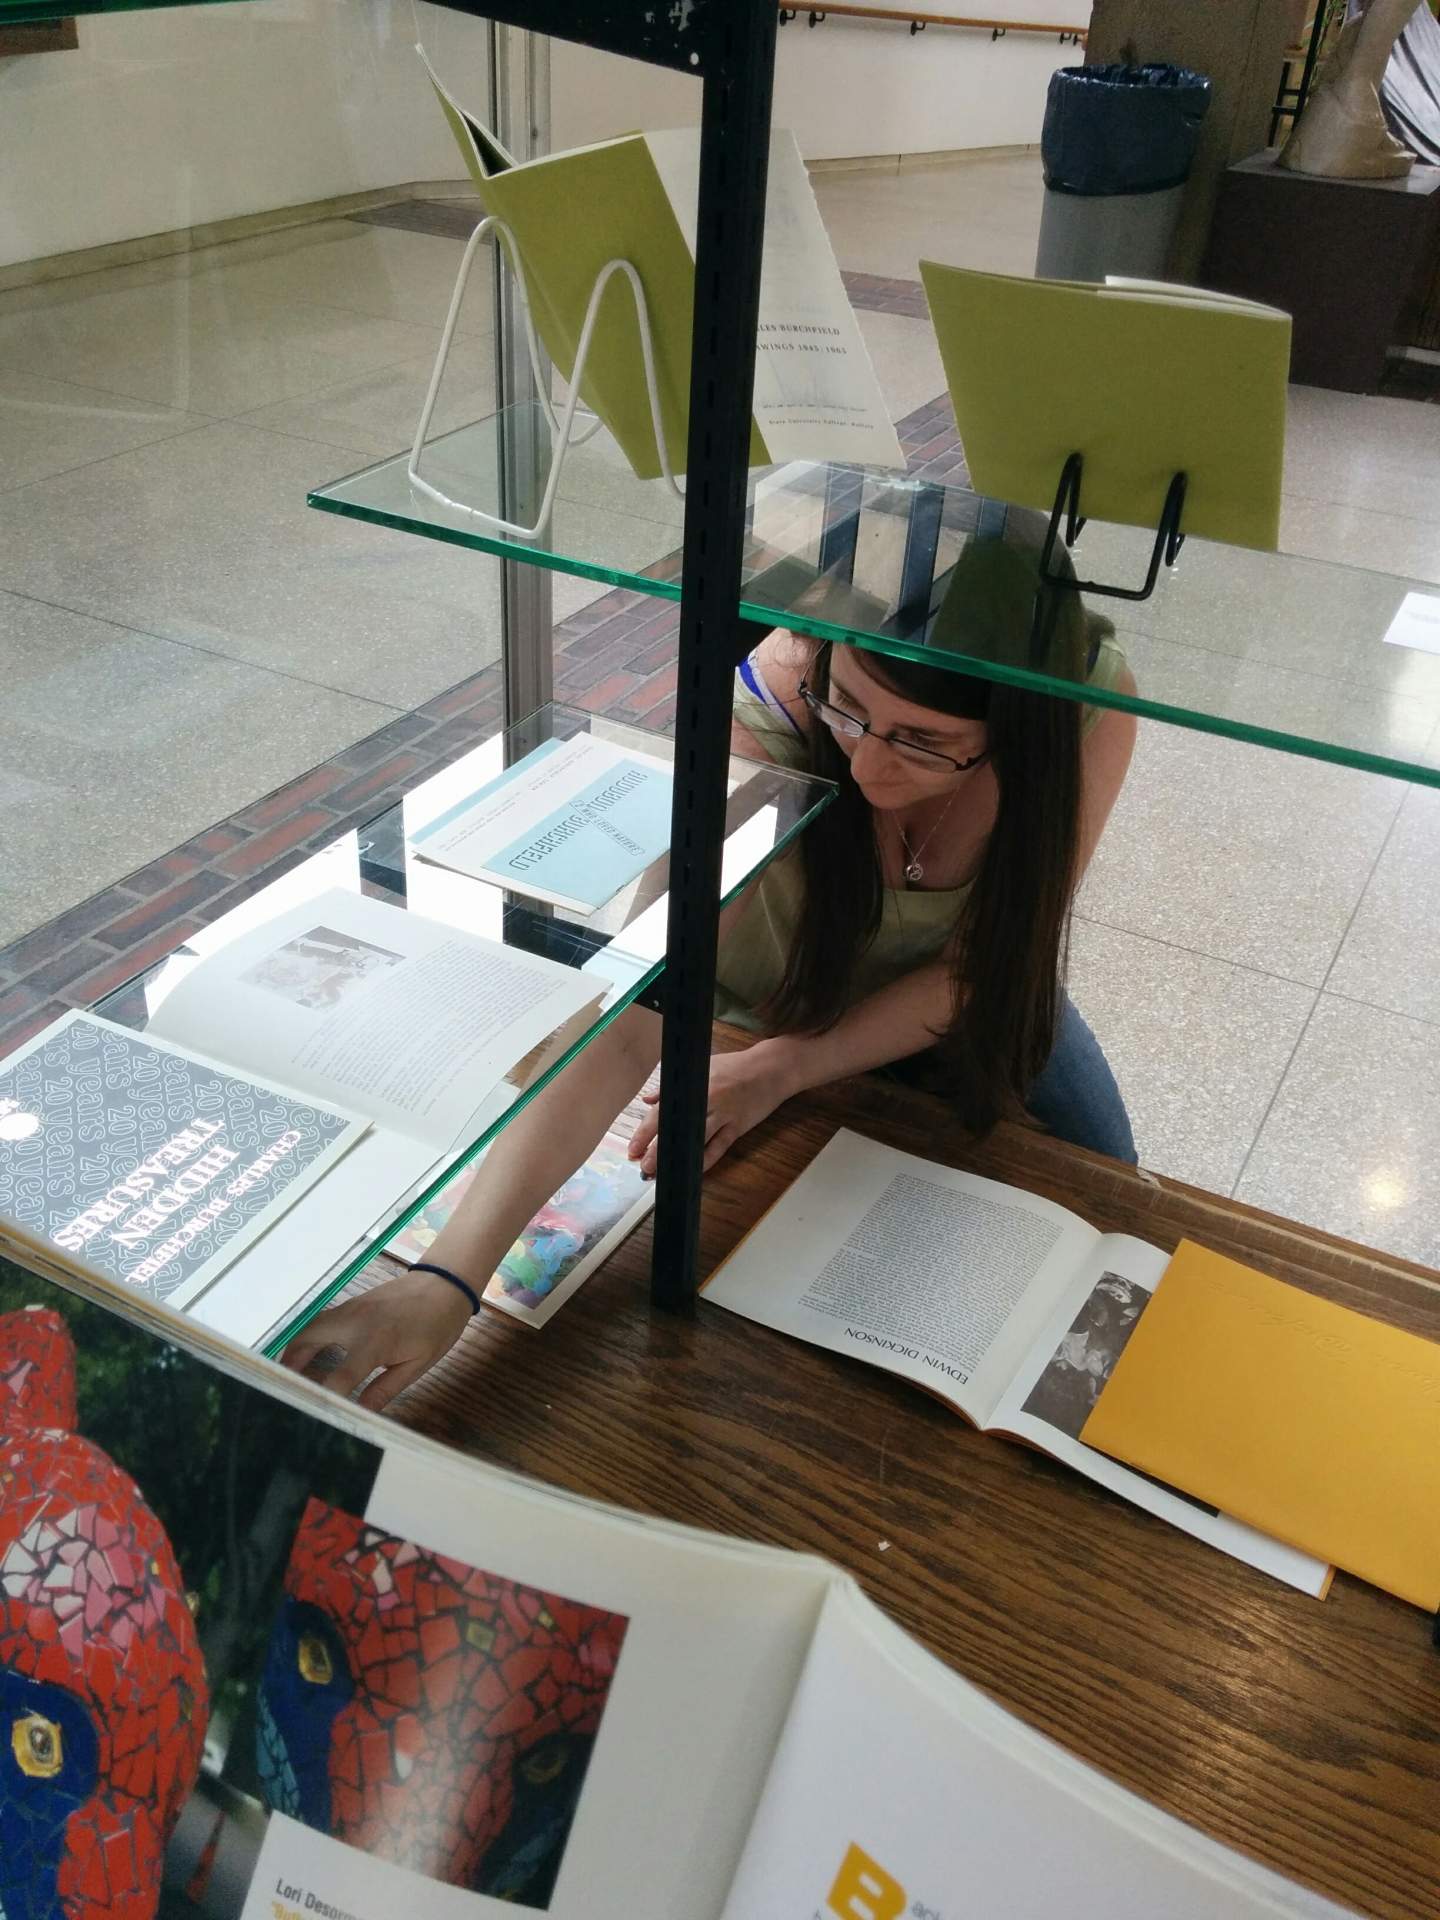 Intern Mary Langille installing Burchfield Penney Art Center publications in display cases at the E.H. Butler Library at SUNY Buffalo State